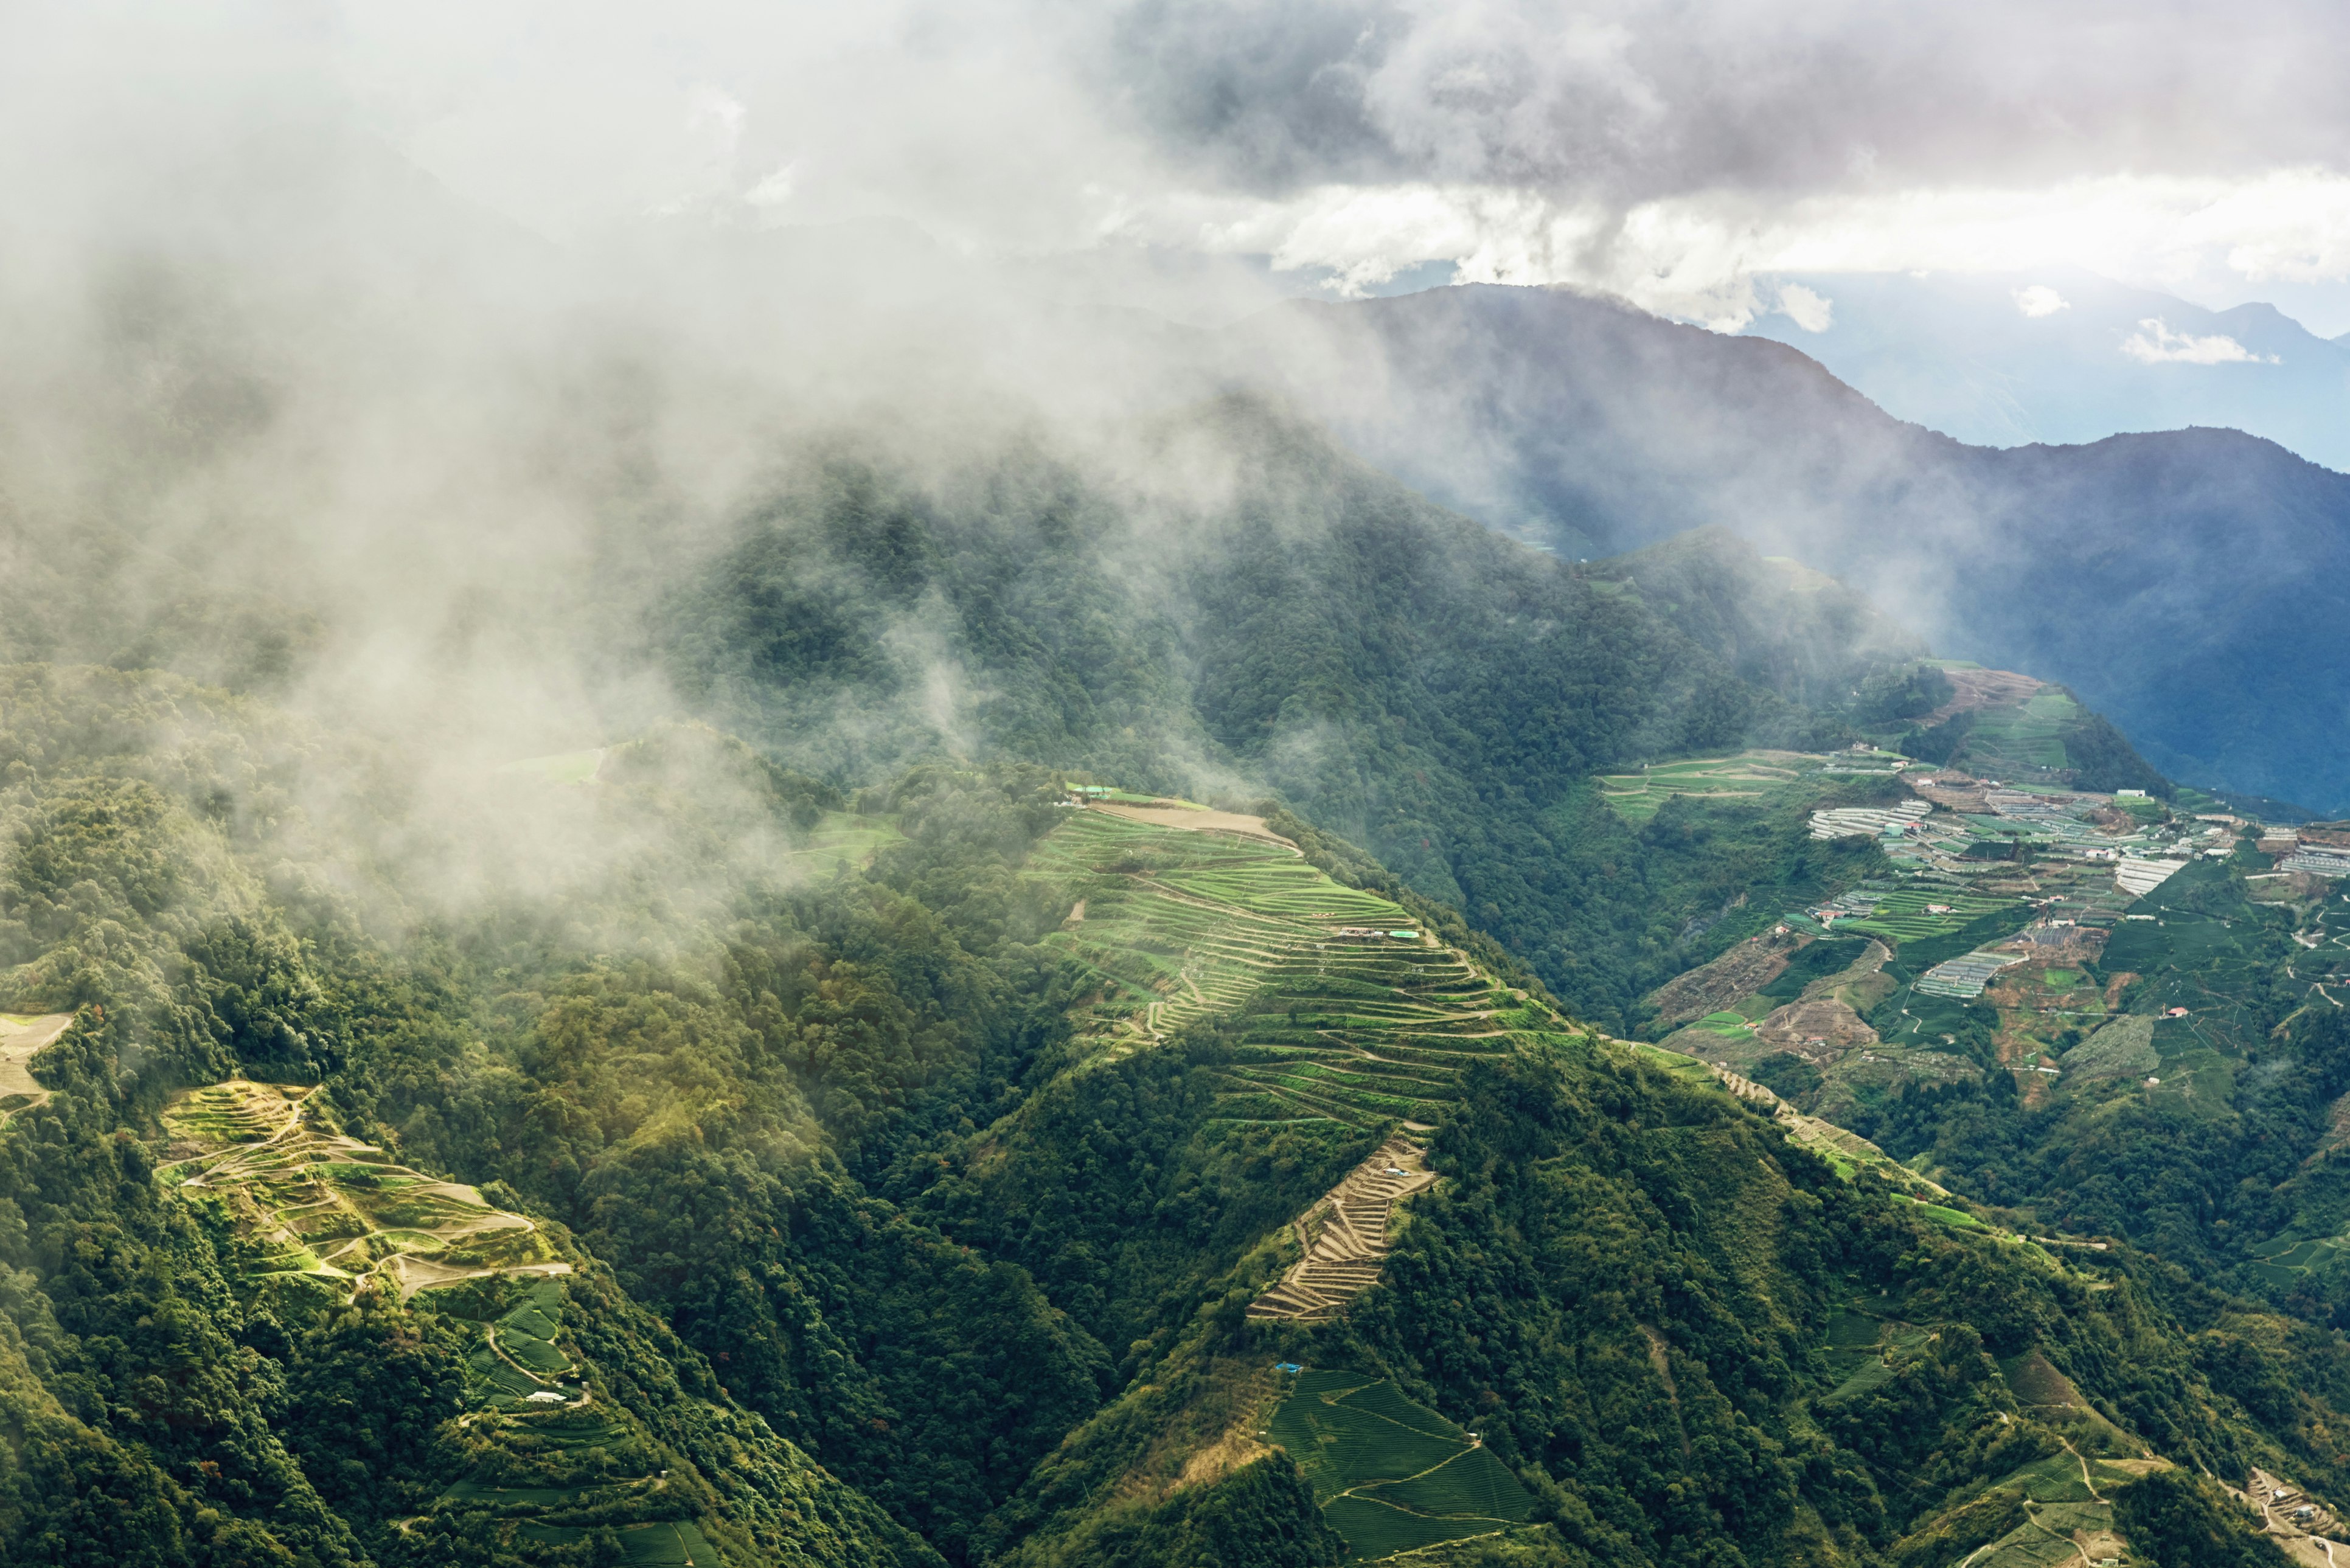 An overhead view of lush green tea plantations with mist hovering over the peaks in Taiwan